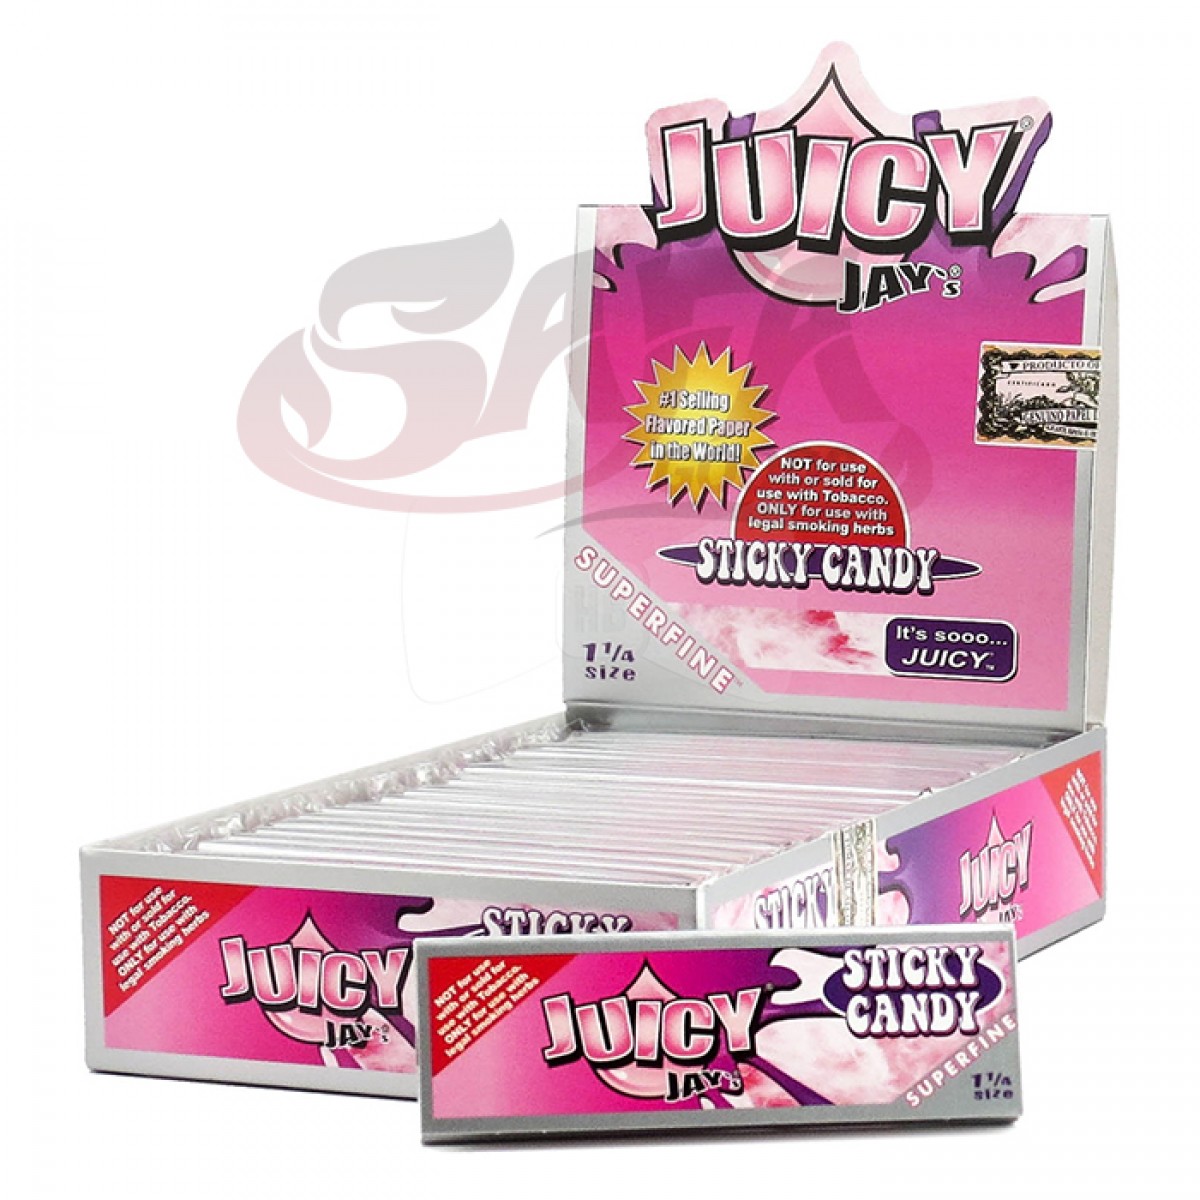 Juicy Jay's SUPER FINE Rolling Papers - 1-1/4in. (24CT)